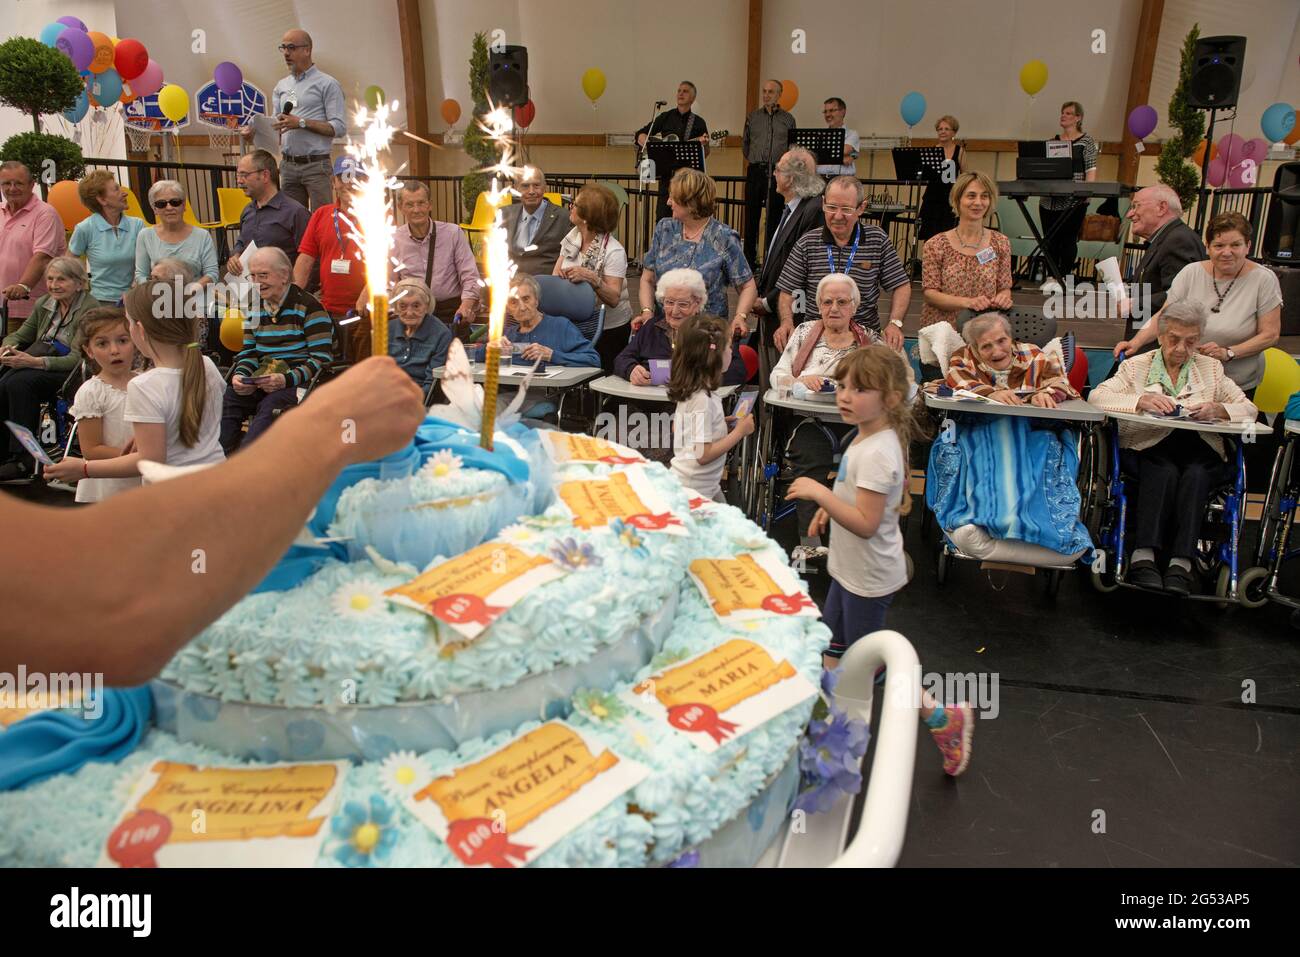 Birthday's celebrations for seniors over 100 years old, at Civitas Vitae, a residence for elderly, in Padua, Italy Stock Photo